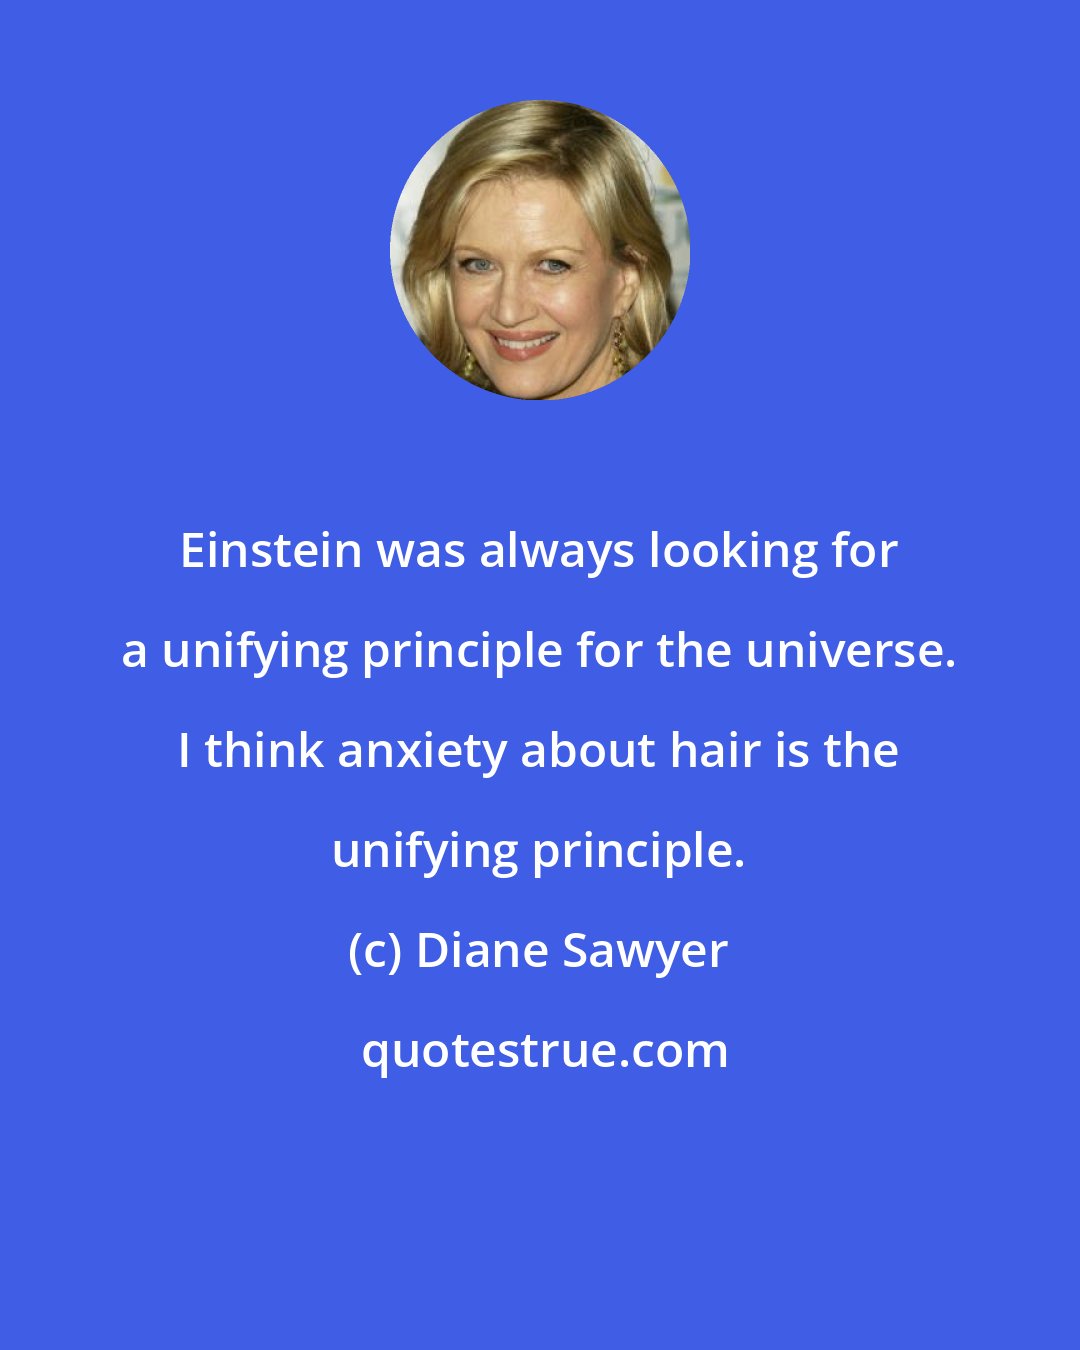 Diane Sawyer: Einstein was always looking for a unifying principle for the universe. I think anxiety about hair is the unifying principle.